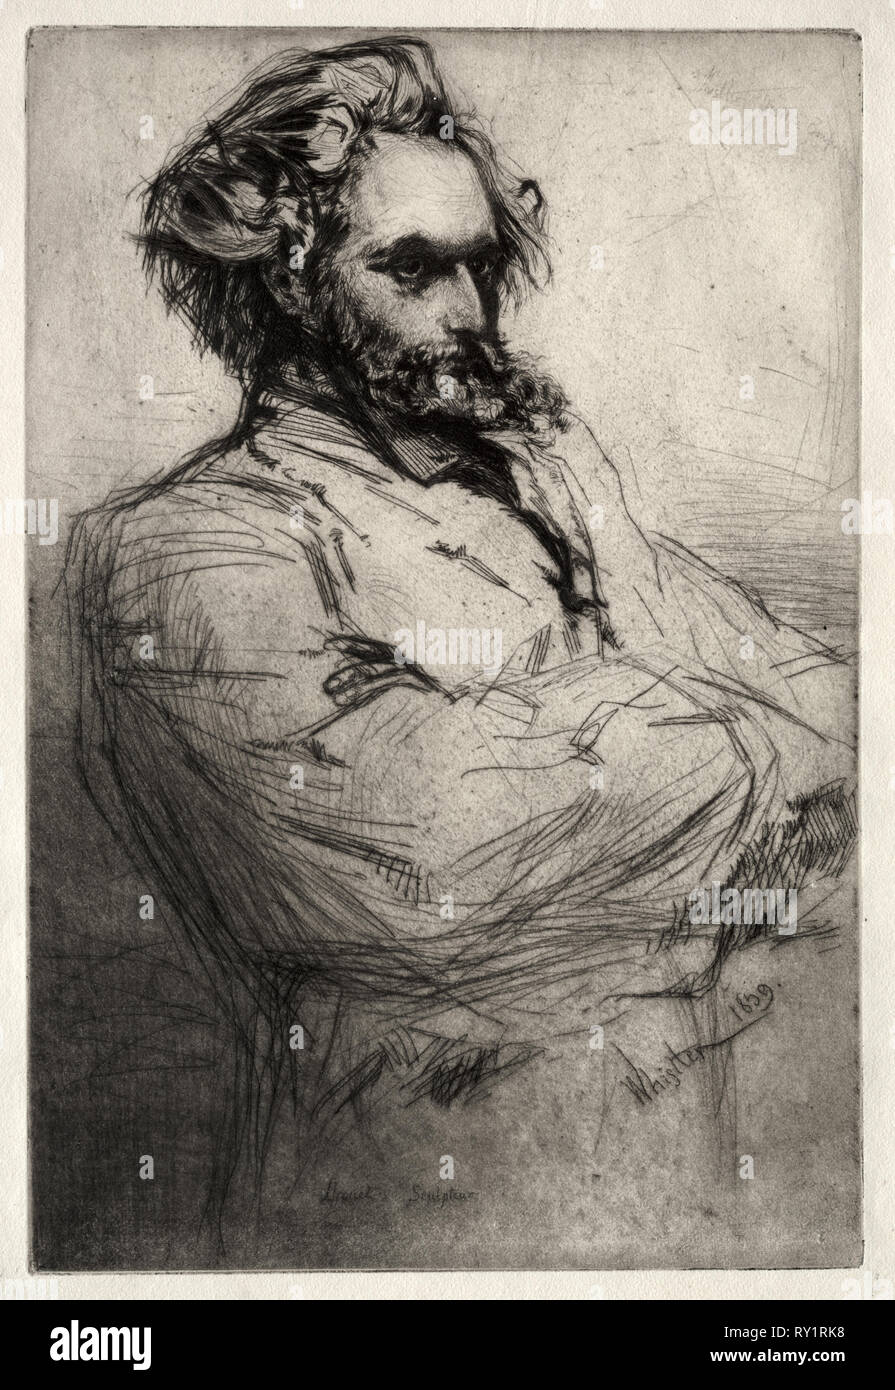 Drouet, 1859. James McNeill Whistler (American, 1834-1903). Etching ...